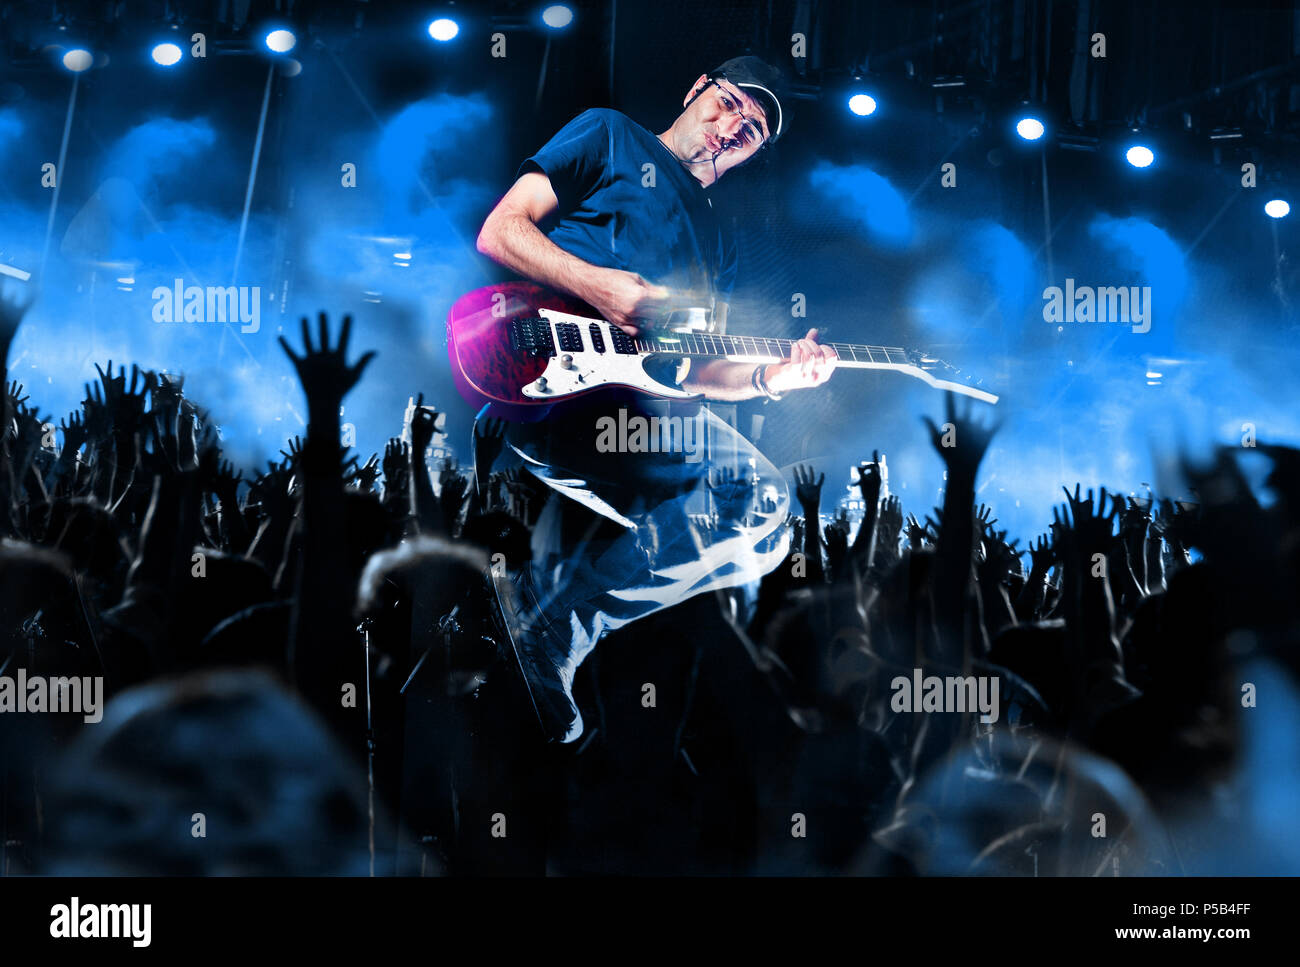 Live music background.Concert and music festival.Instrument on stage and band Stock Photo